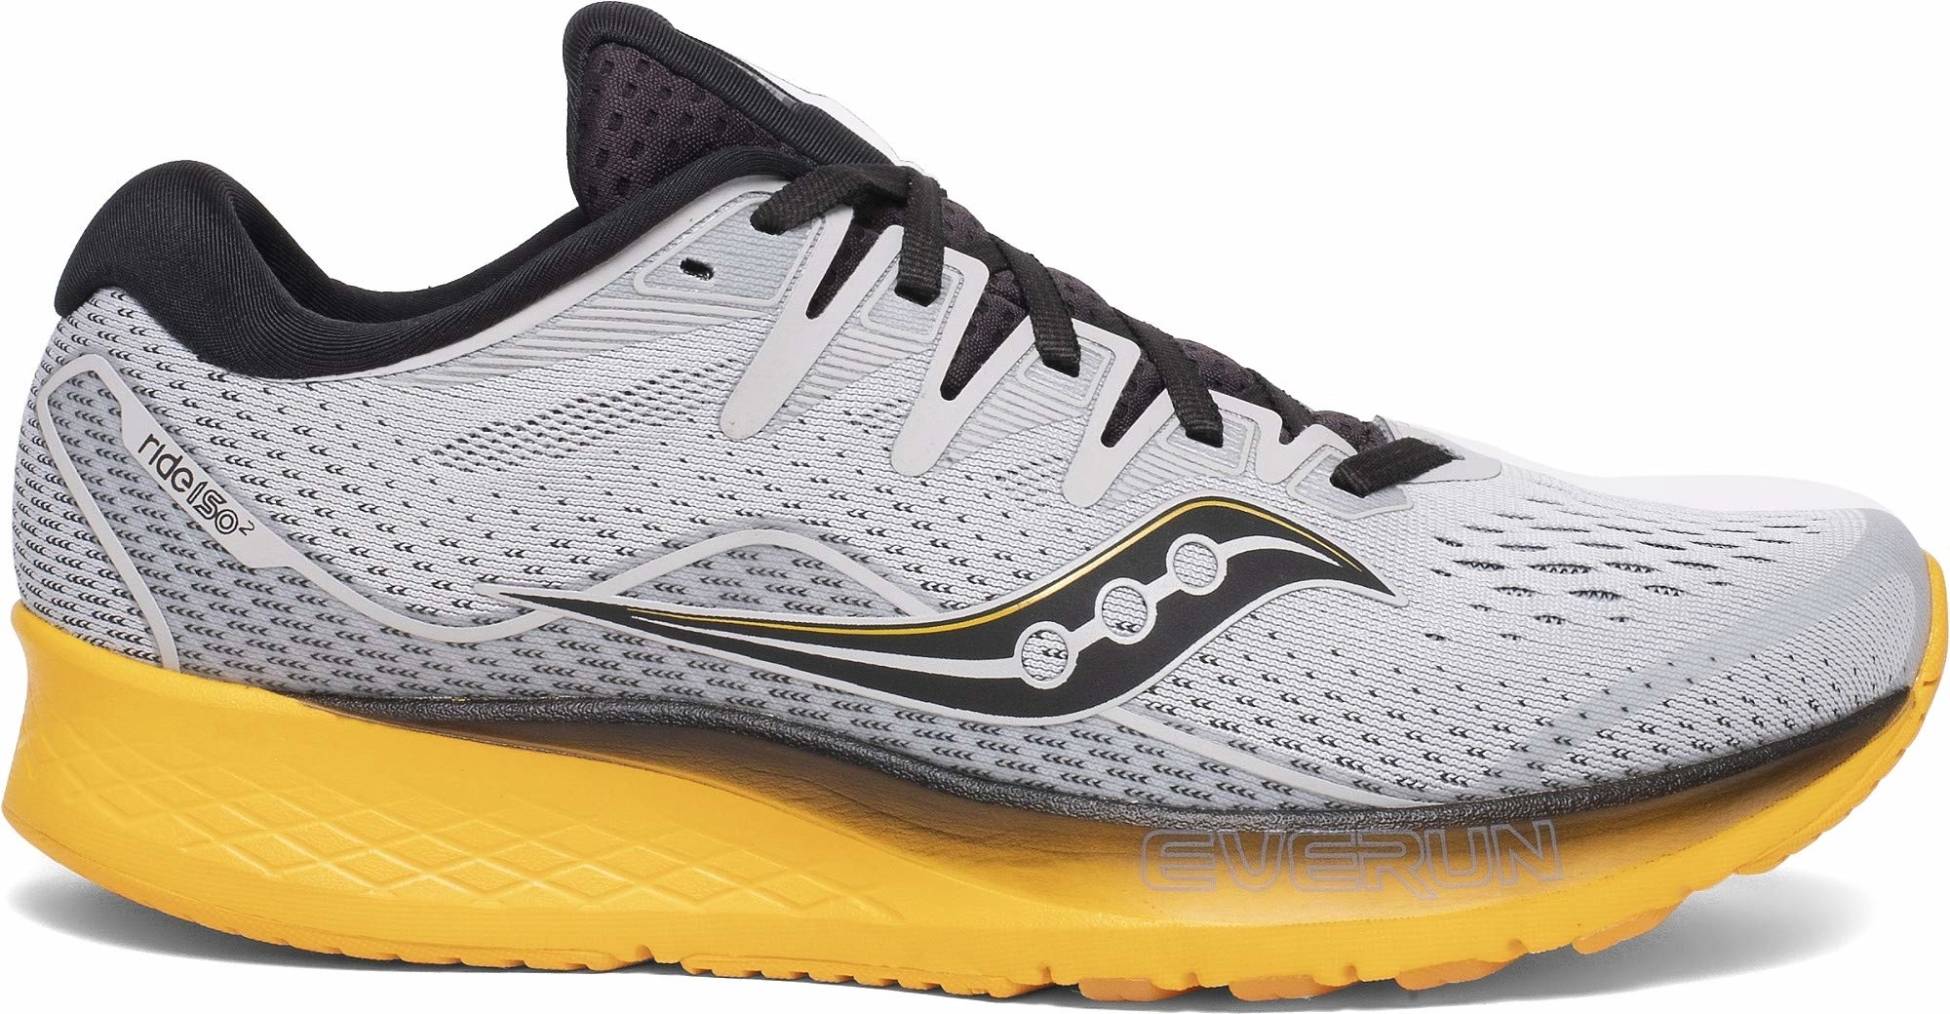 Only £56 + Review of Saucony Ride ISO 2 